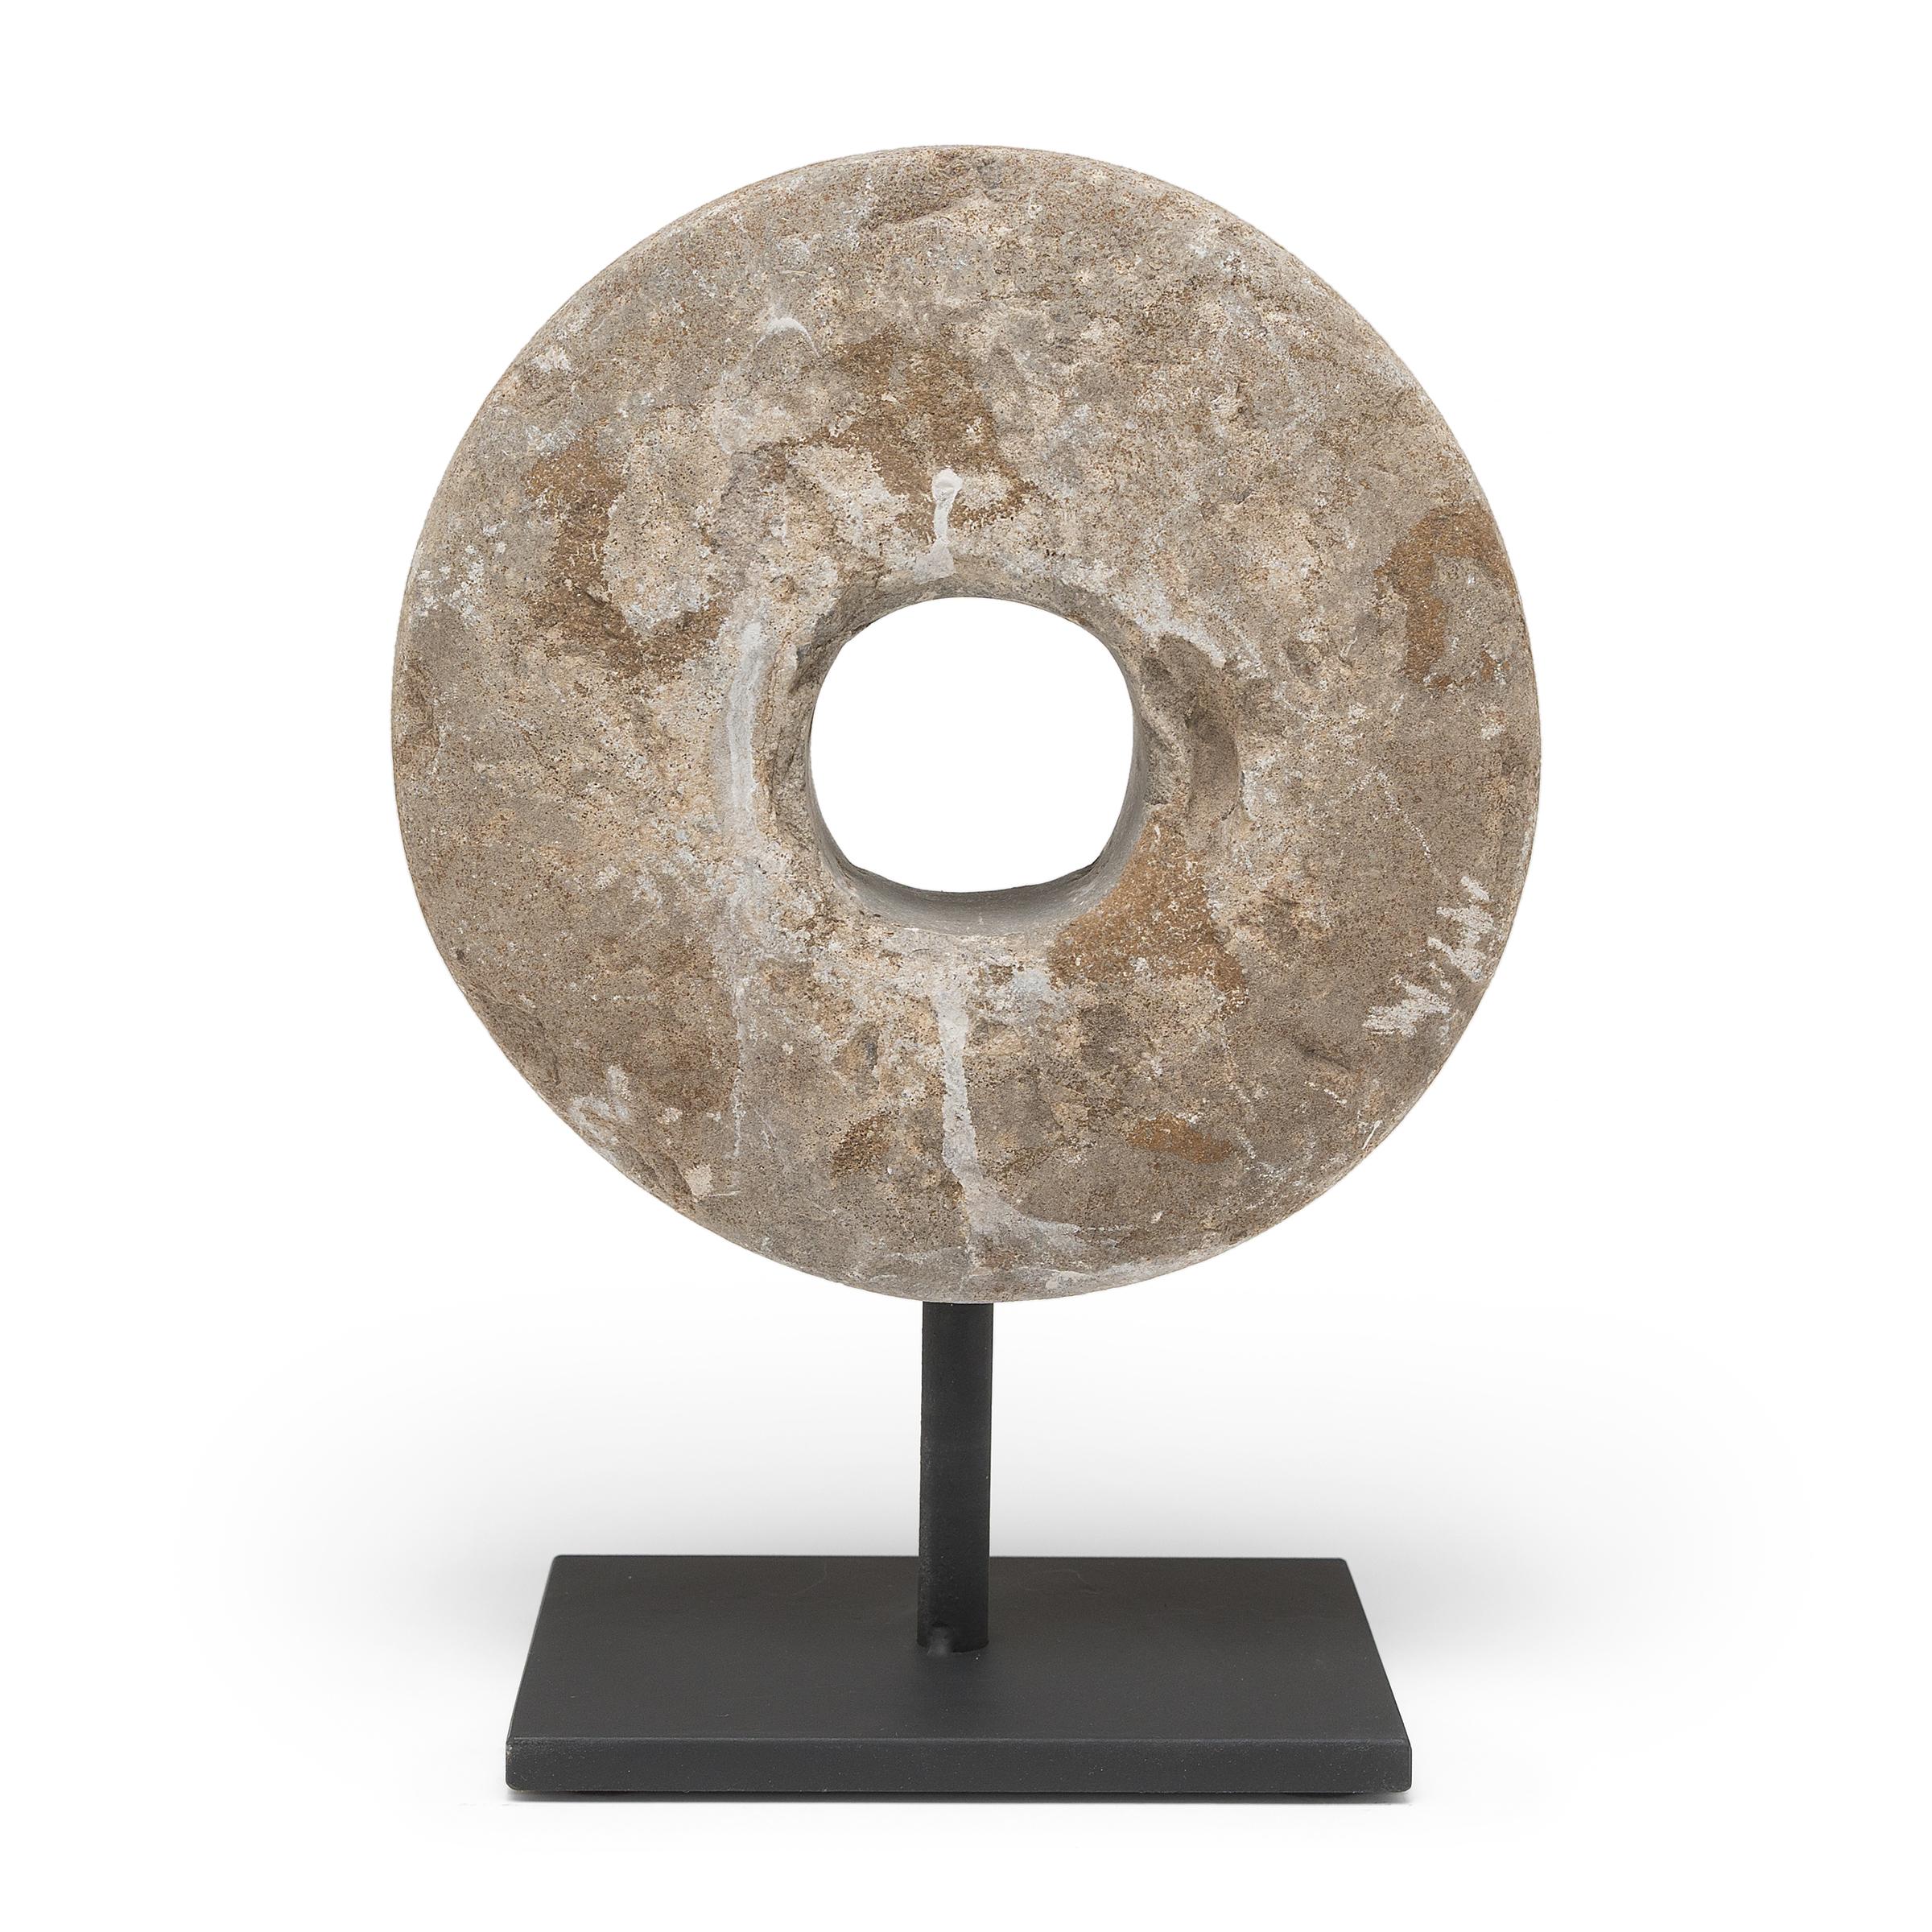 Minimalist Chinese Prosperity Stone Disc, c. 1900 For Sale